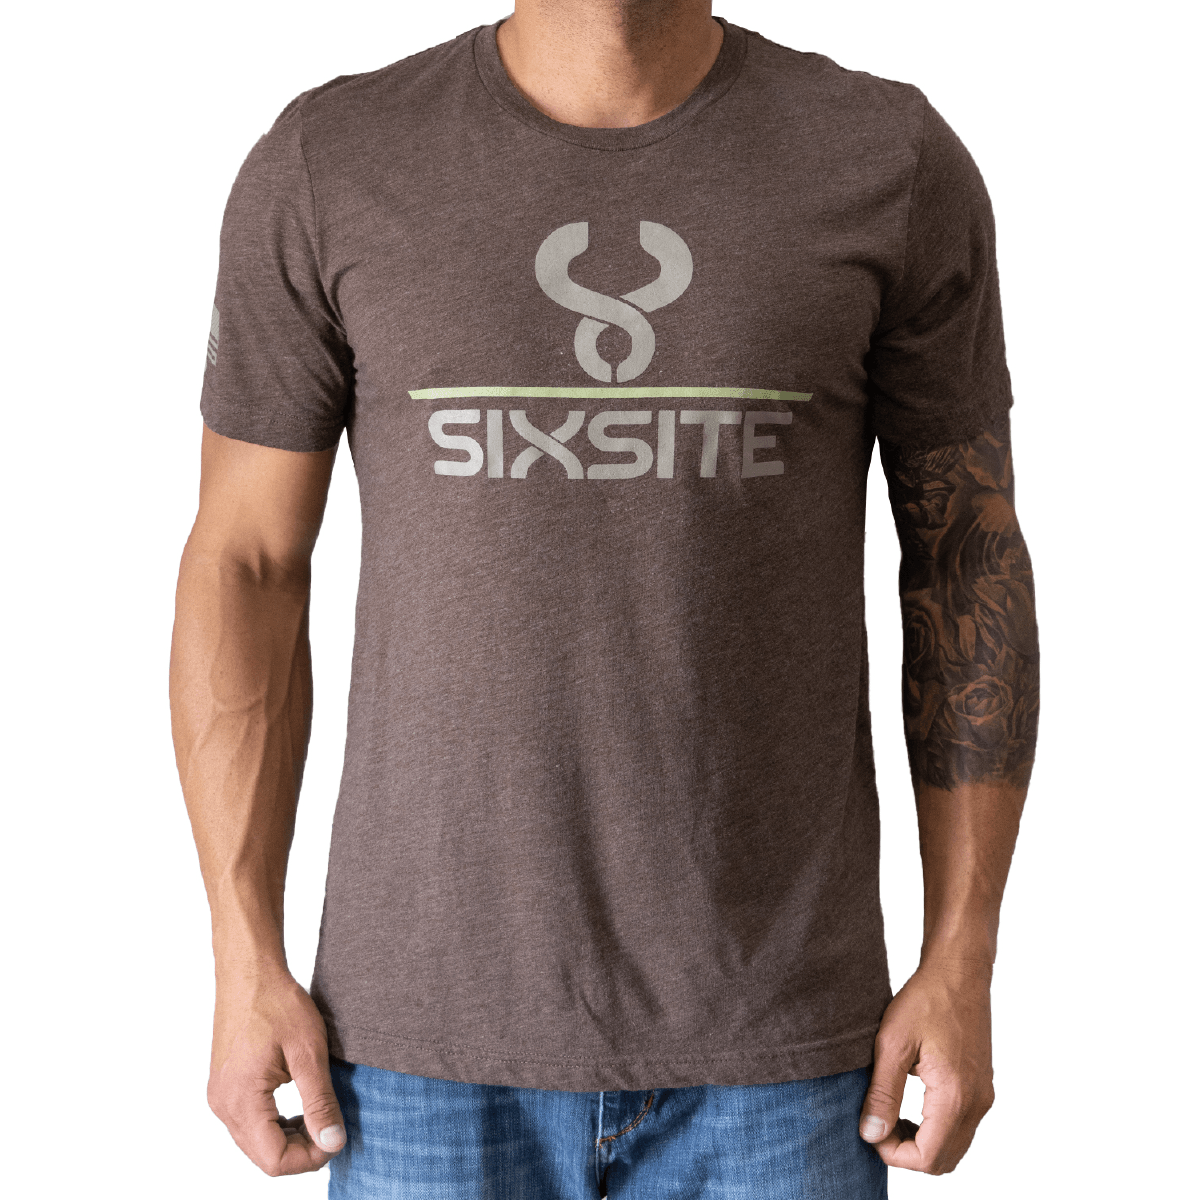 Outsider SIXSITE T-Shirt, Brown